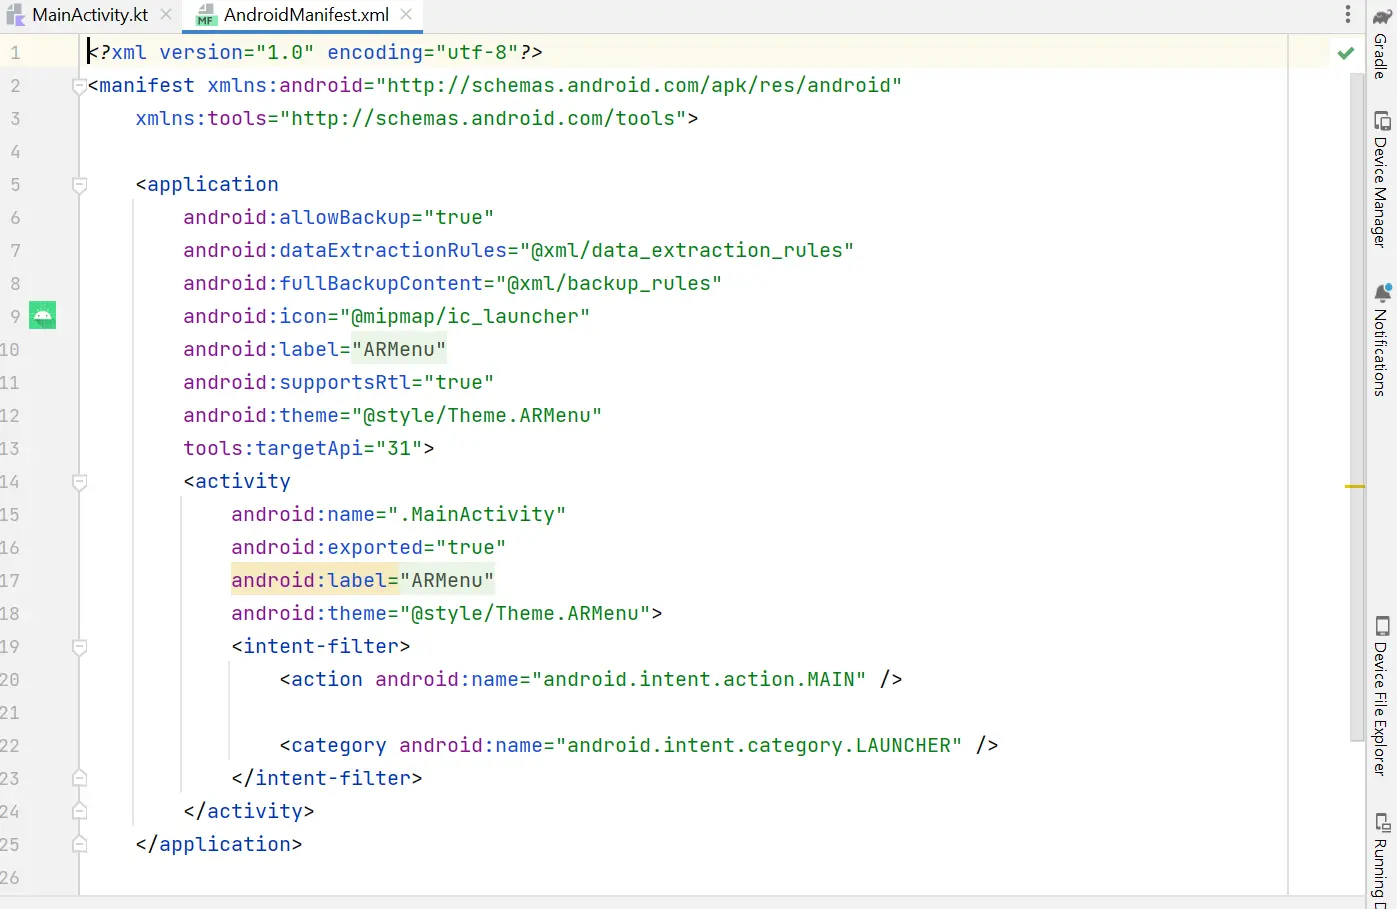 AndroidManifest.xml File in an Android Application